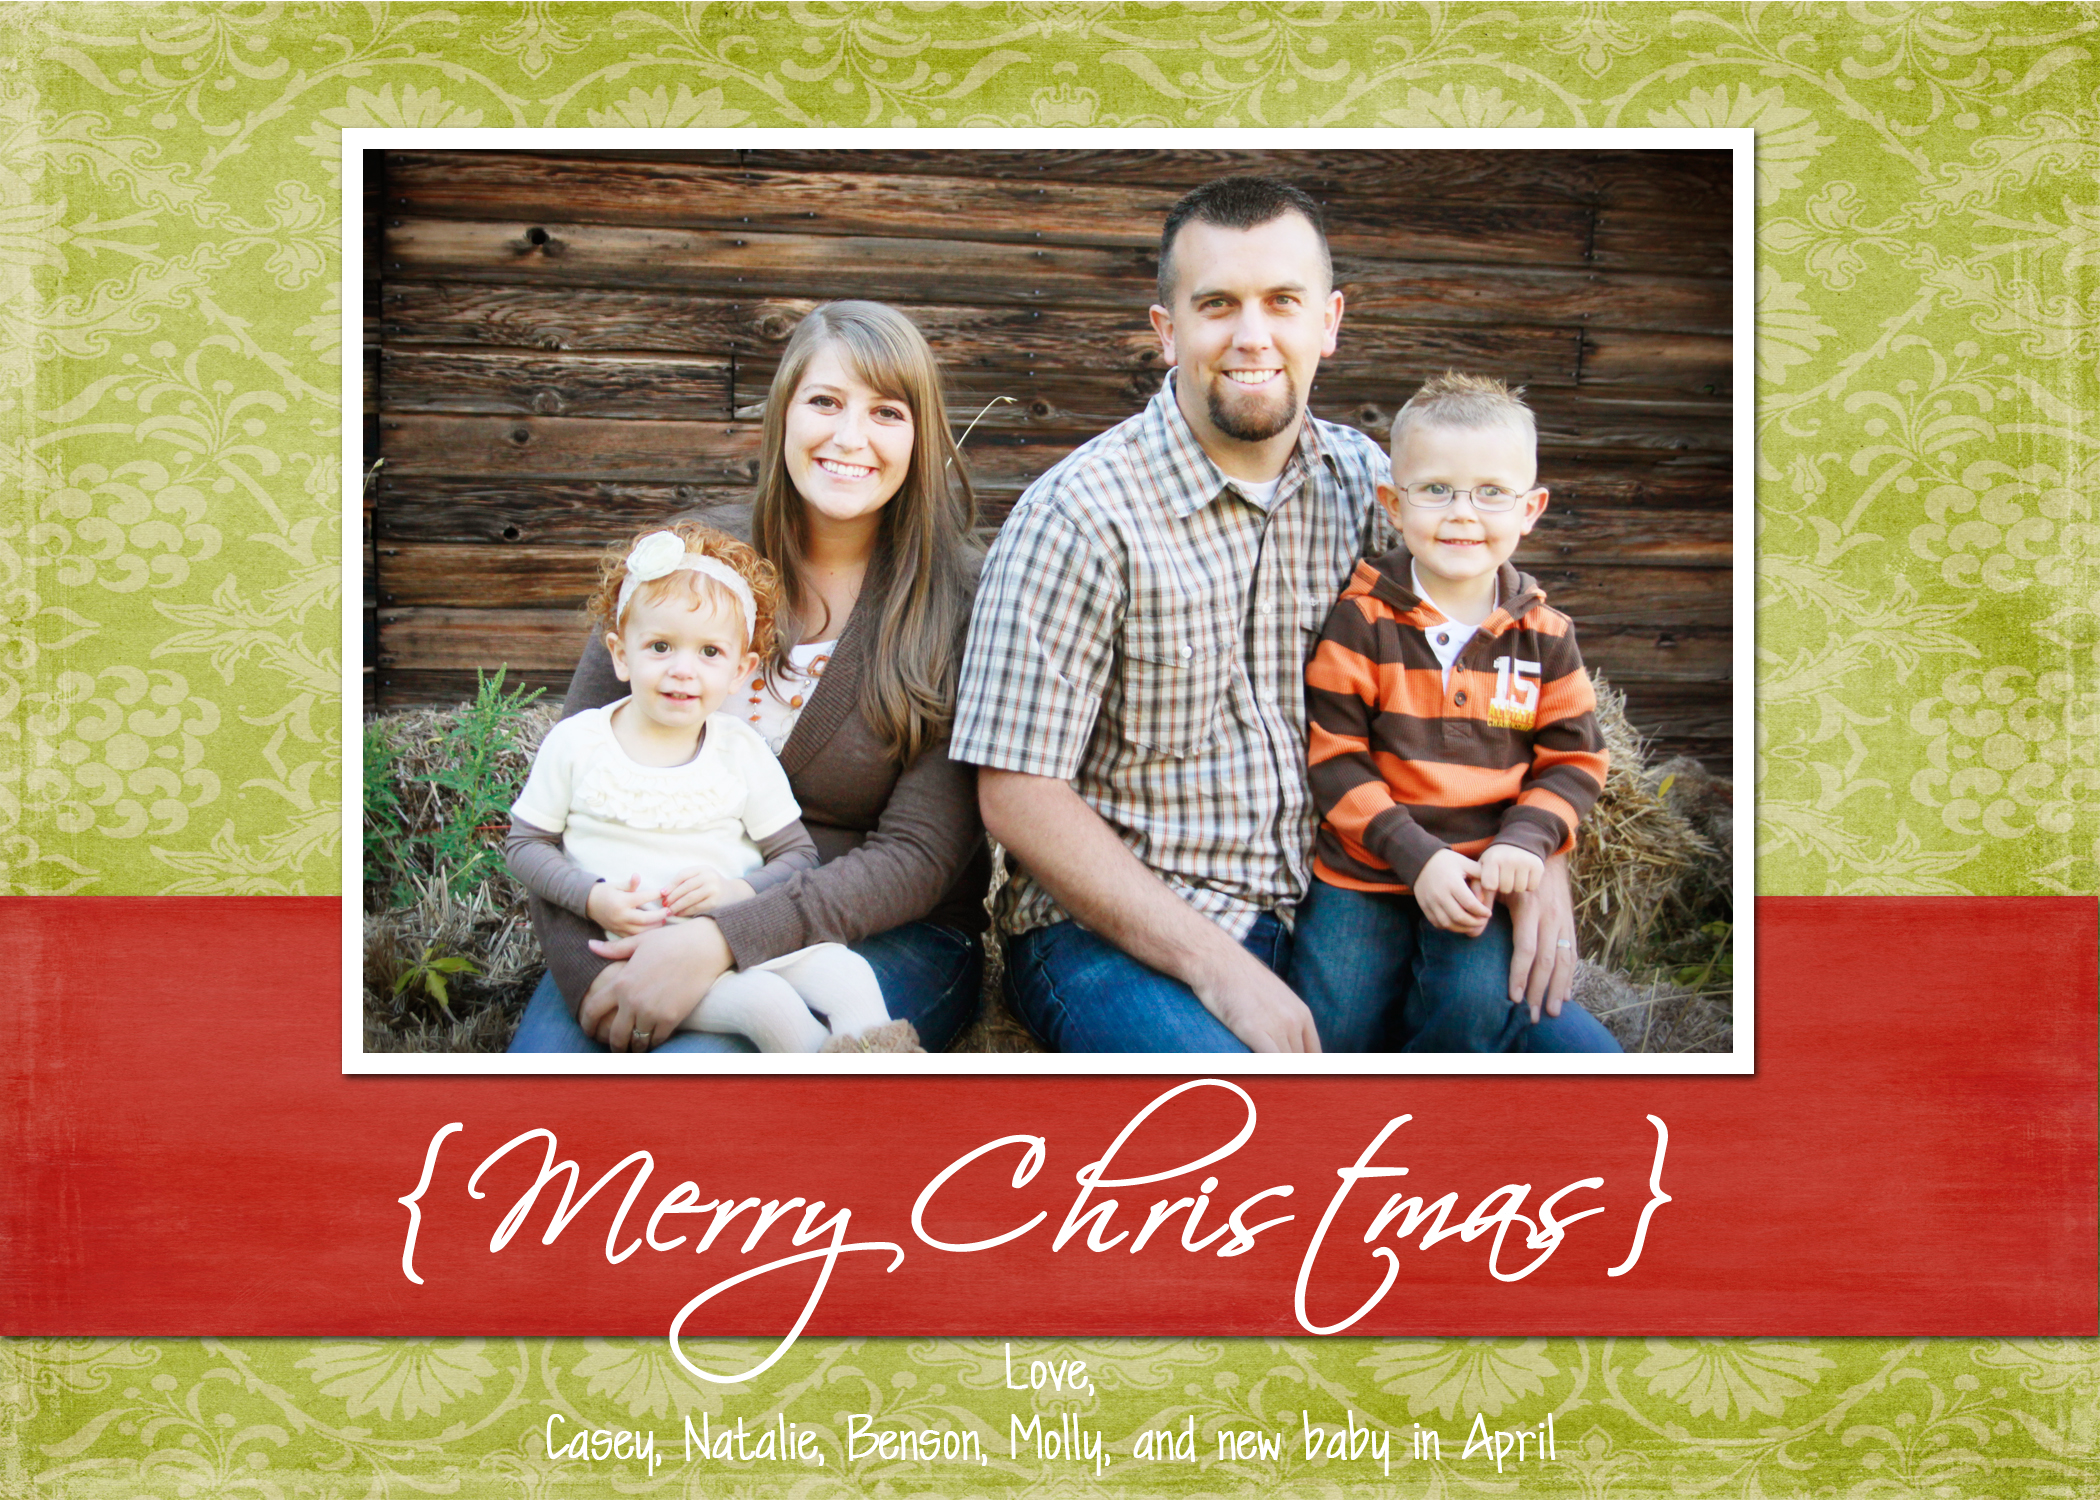 Christmas Card Templates Free Download - The Creative Mom Regarding Christmas Photo Cards Templates Free Downloads